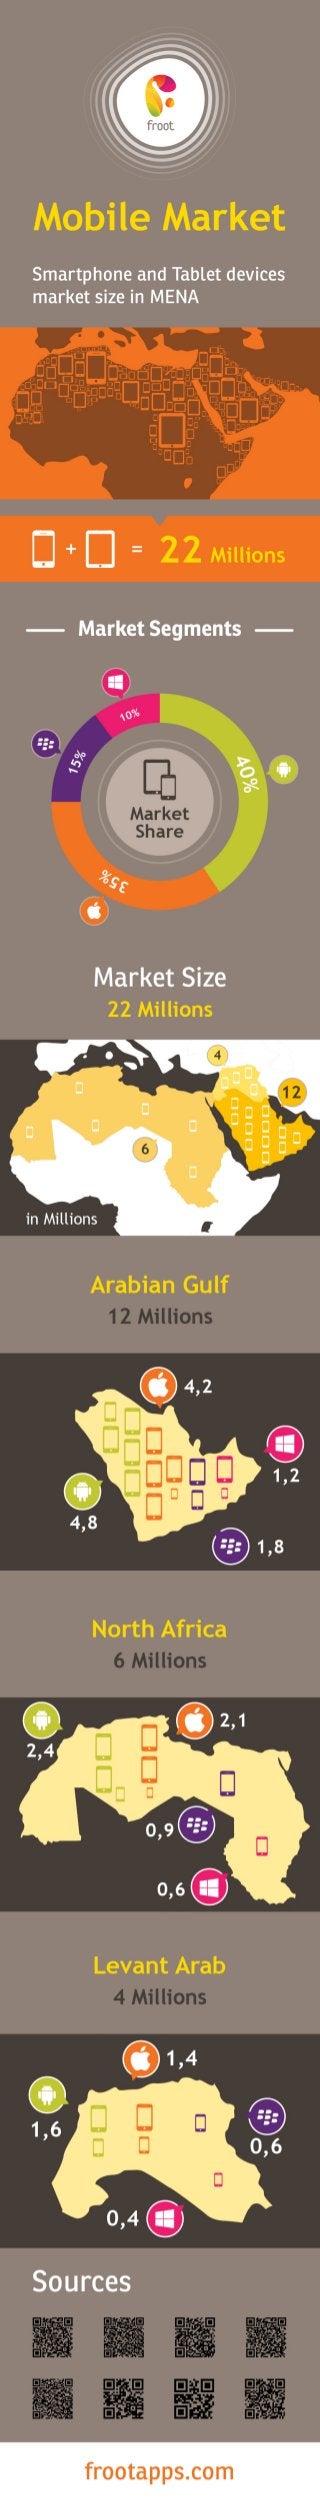 Infographic: Smartphone and Tablet devices market size in Middle East